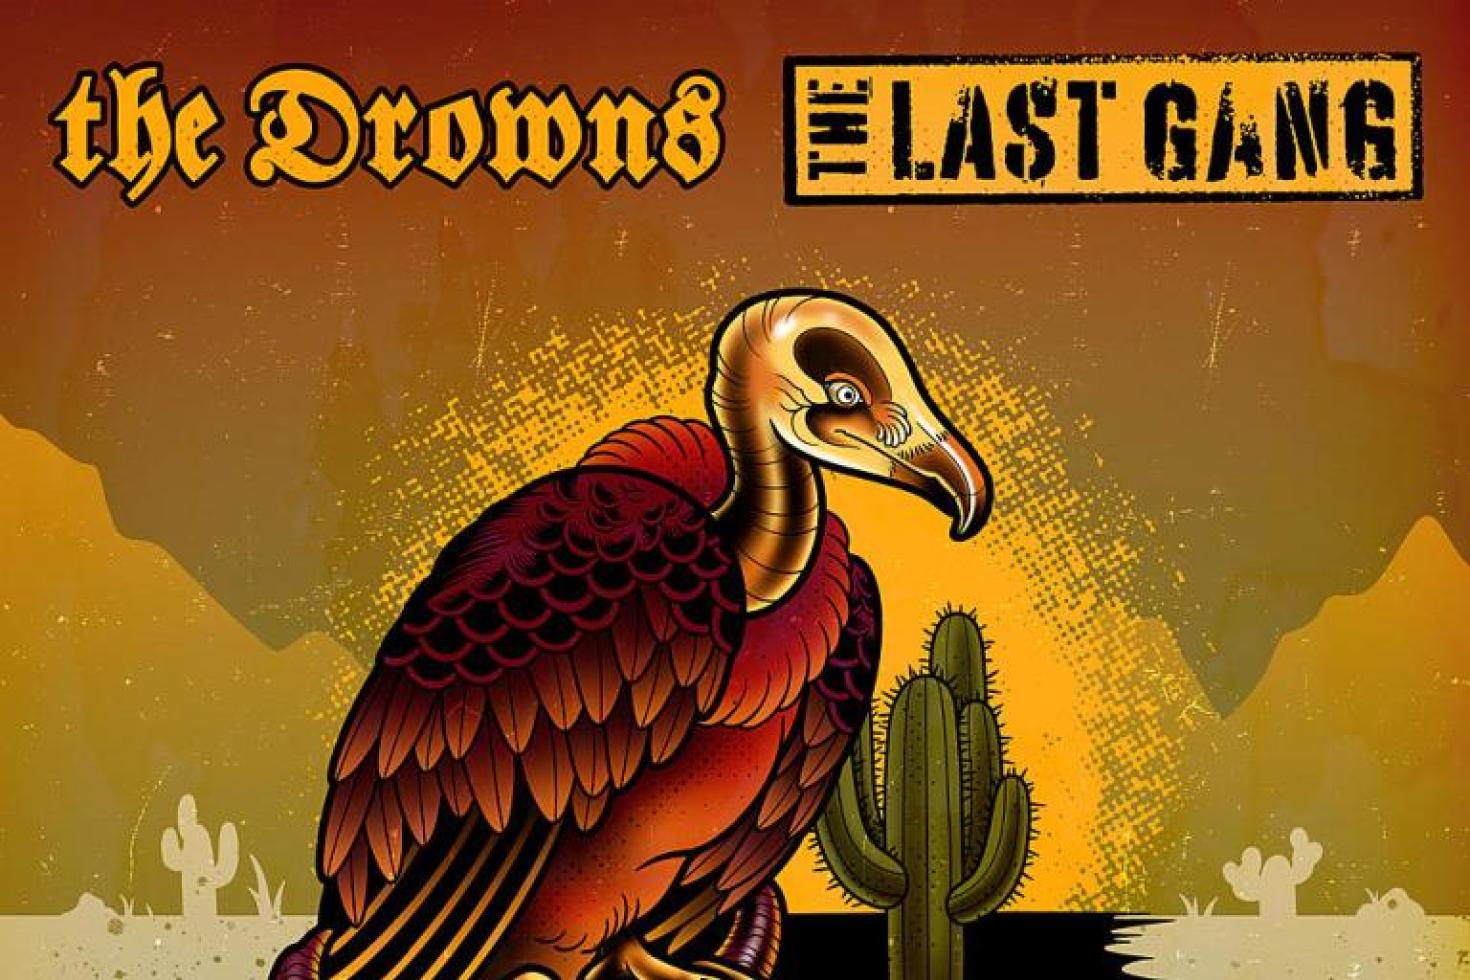 The Drowns vs. The Last Gang